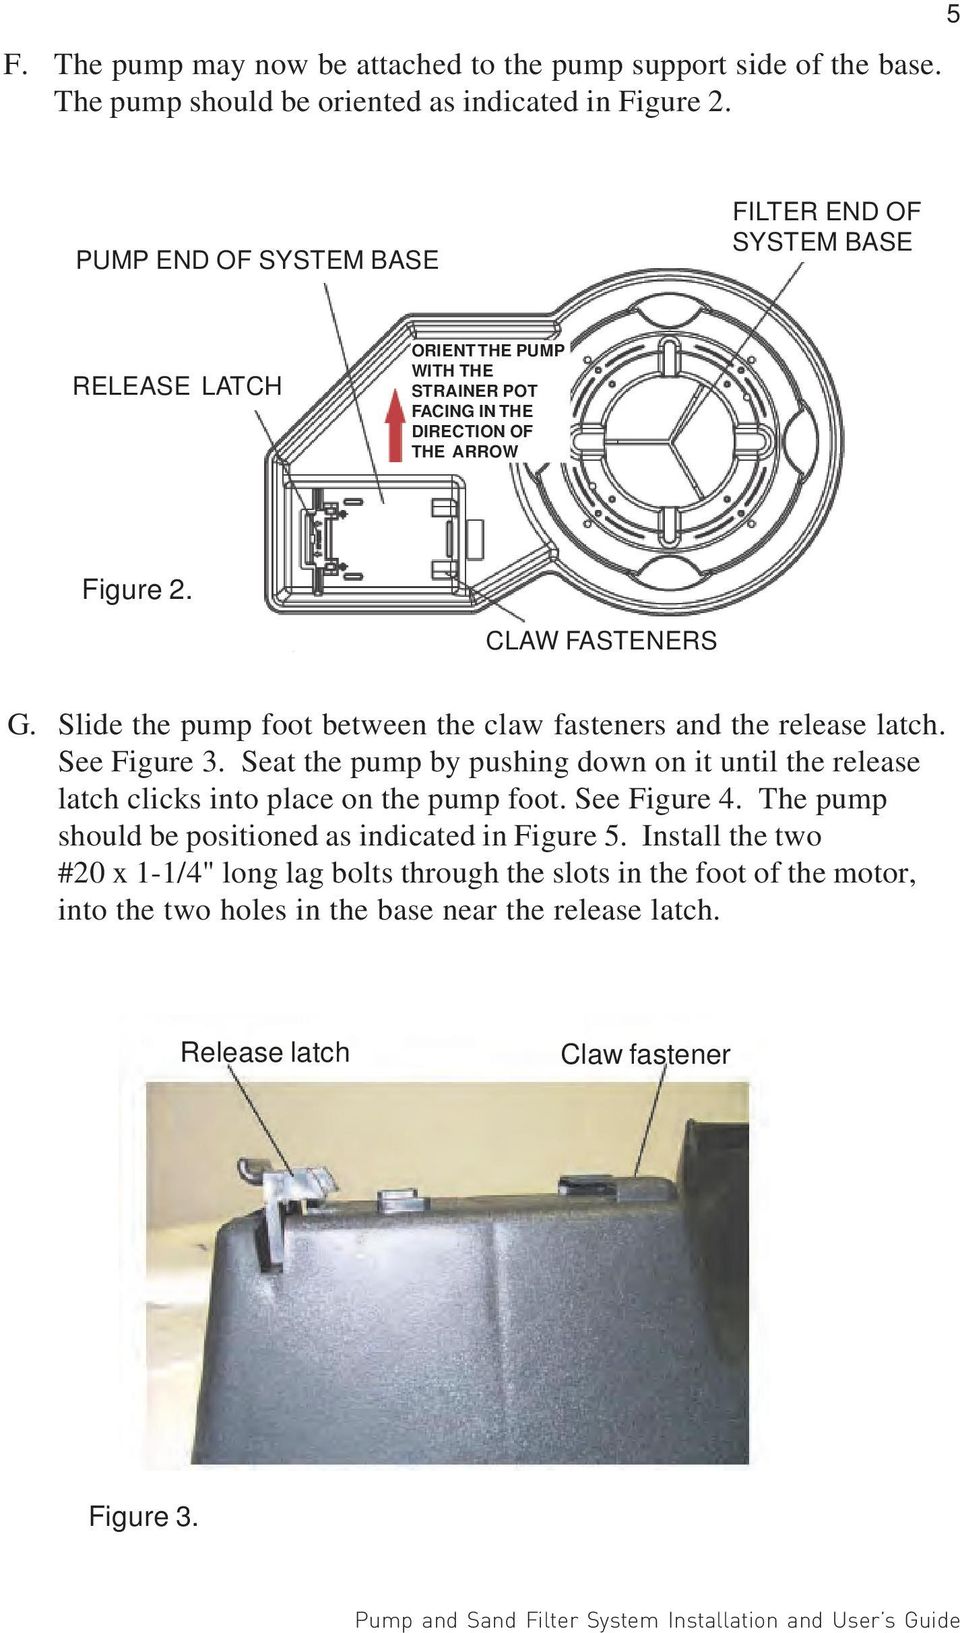 Sli the pump foot between the cw fasteners and the release tch. See Figure 3. Seat the pump by pushing down on it until the release tch clicks into pce on the pump foot. See Figure 4.